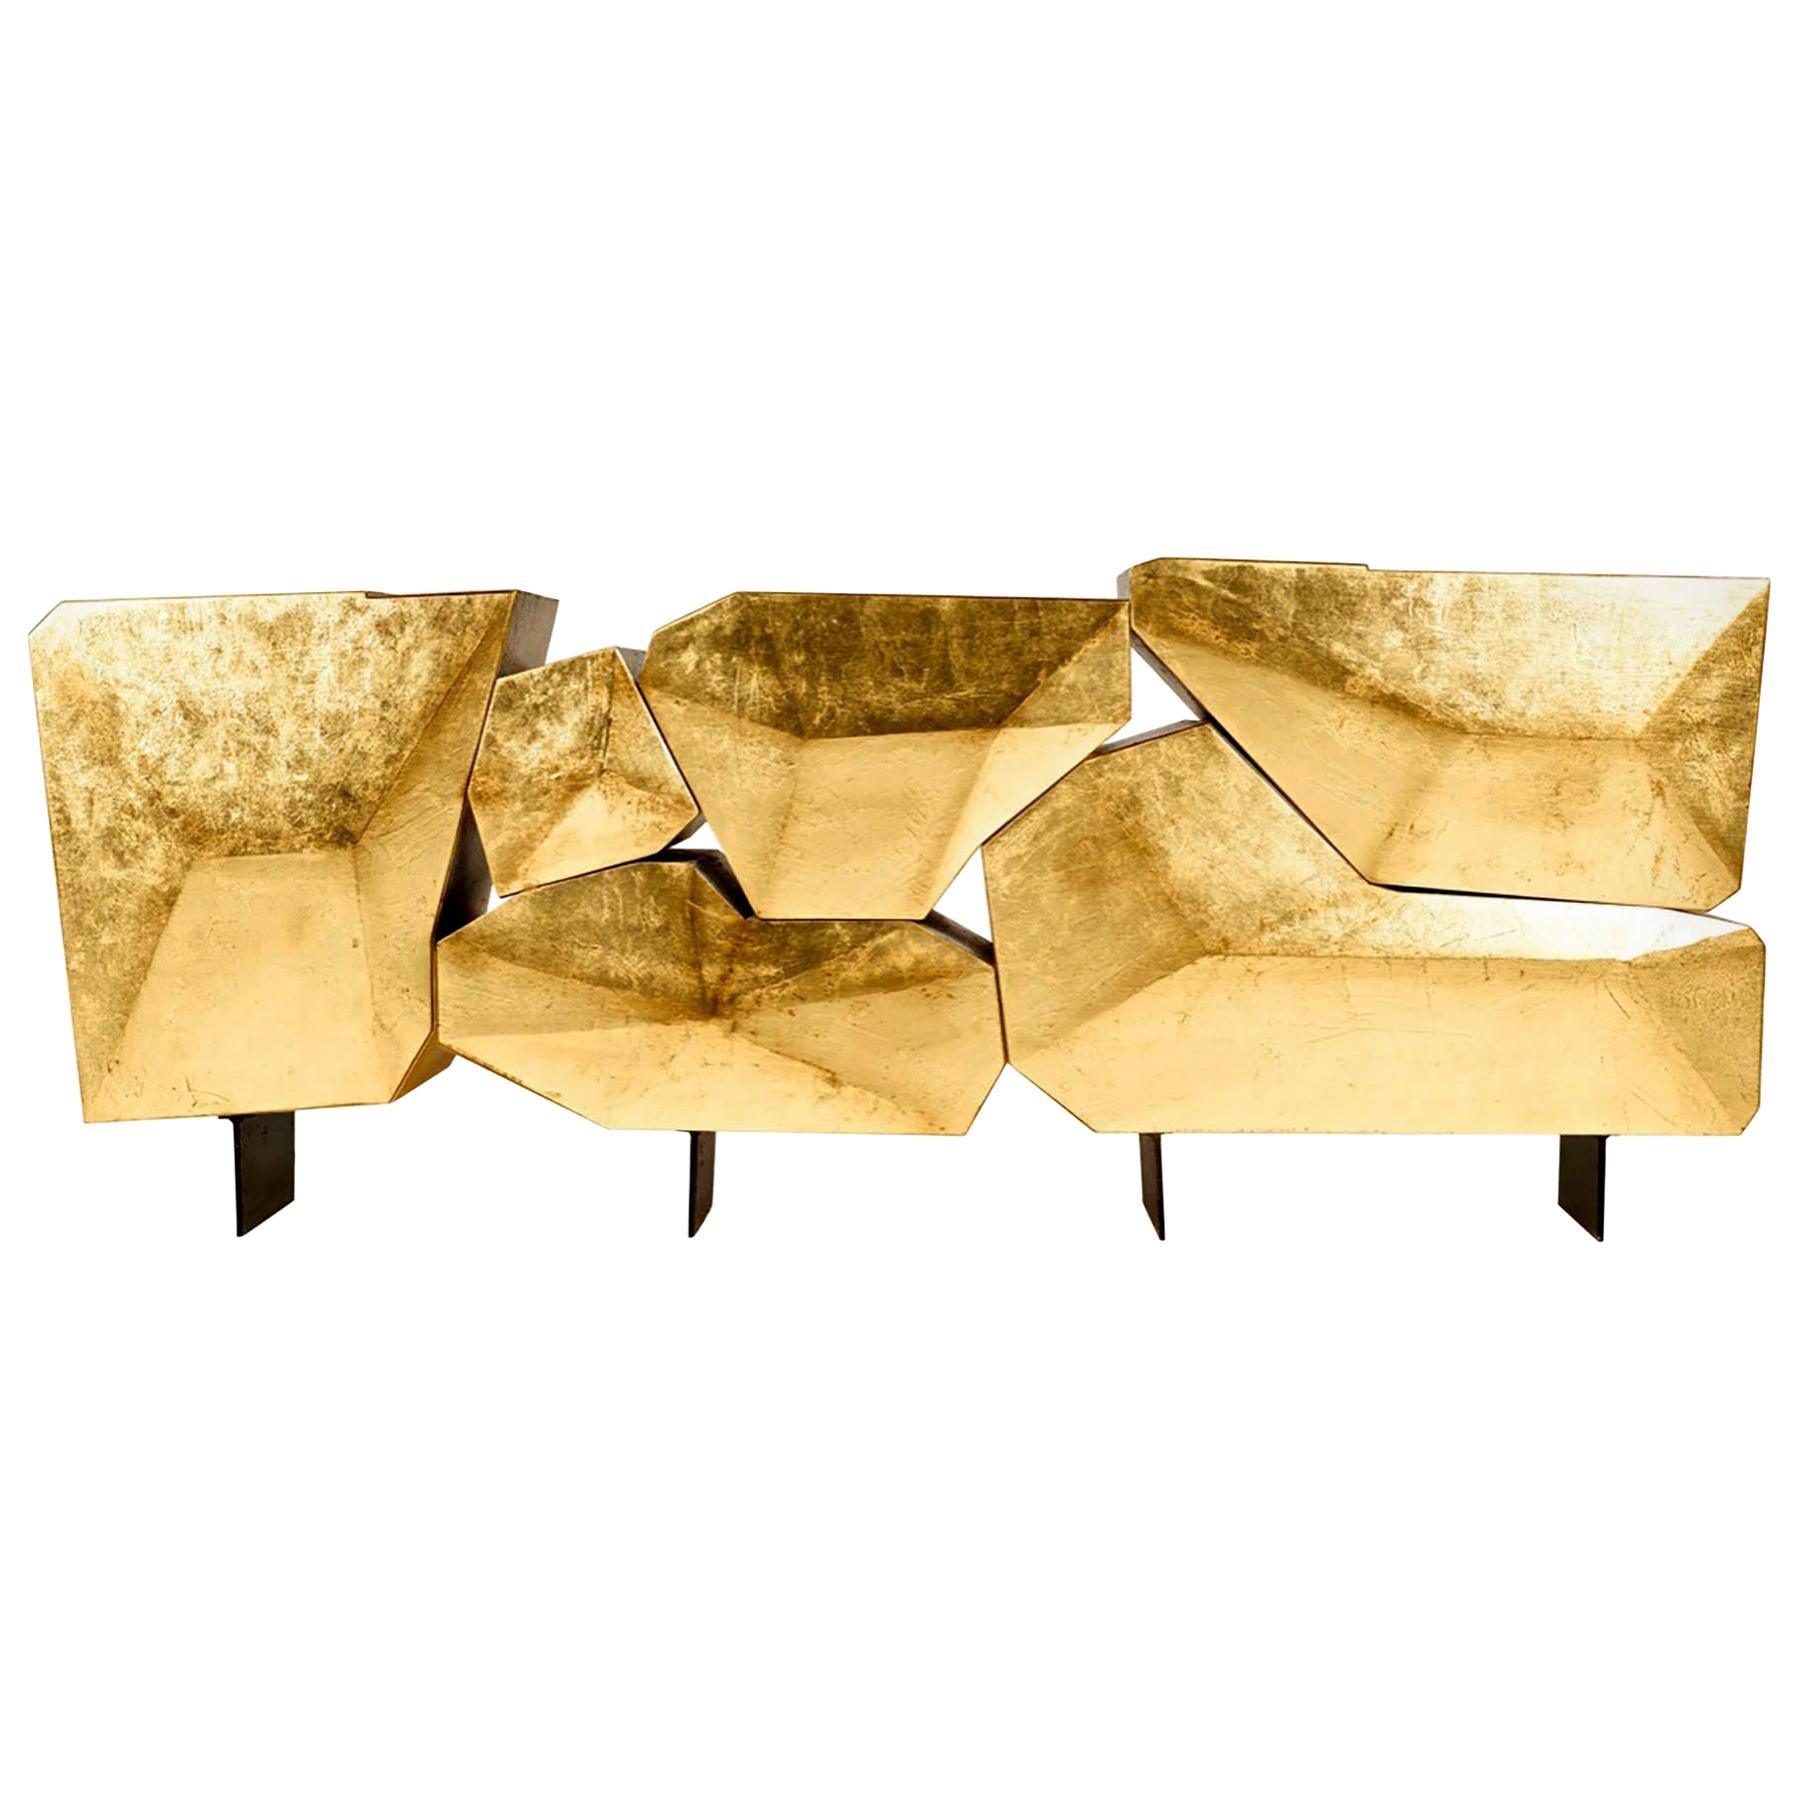 Stunning and Luxury Gilt Modern Contemporary Sideboard in Iron Wood & Gold Leaf For Sale